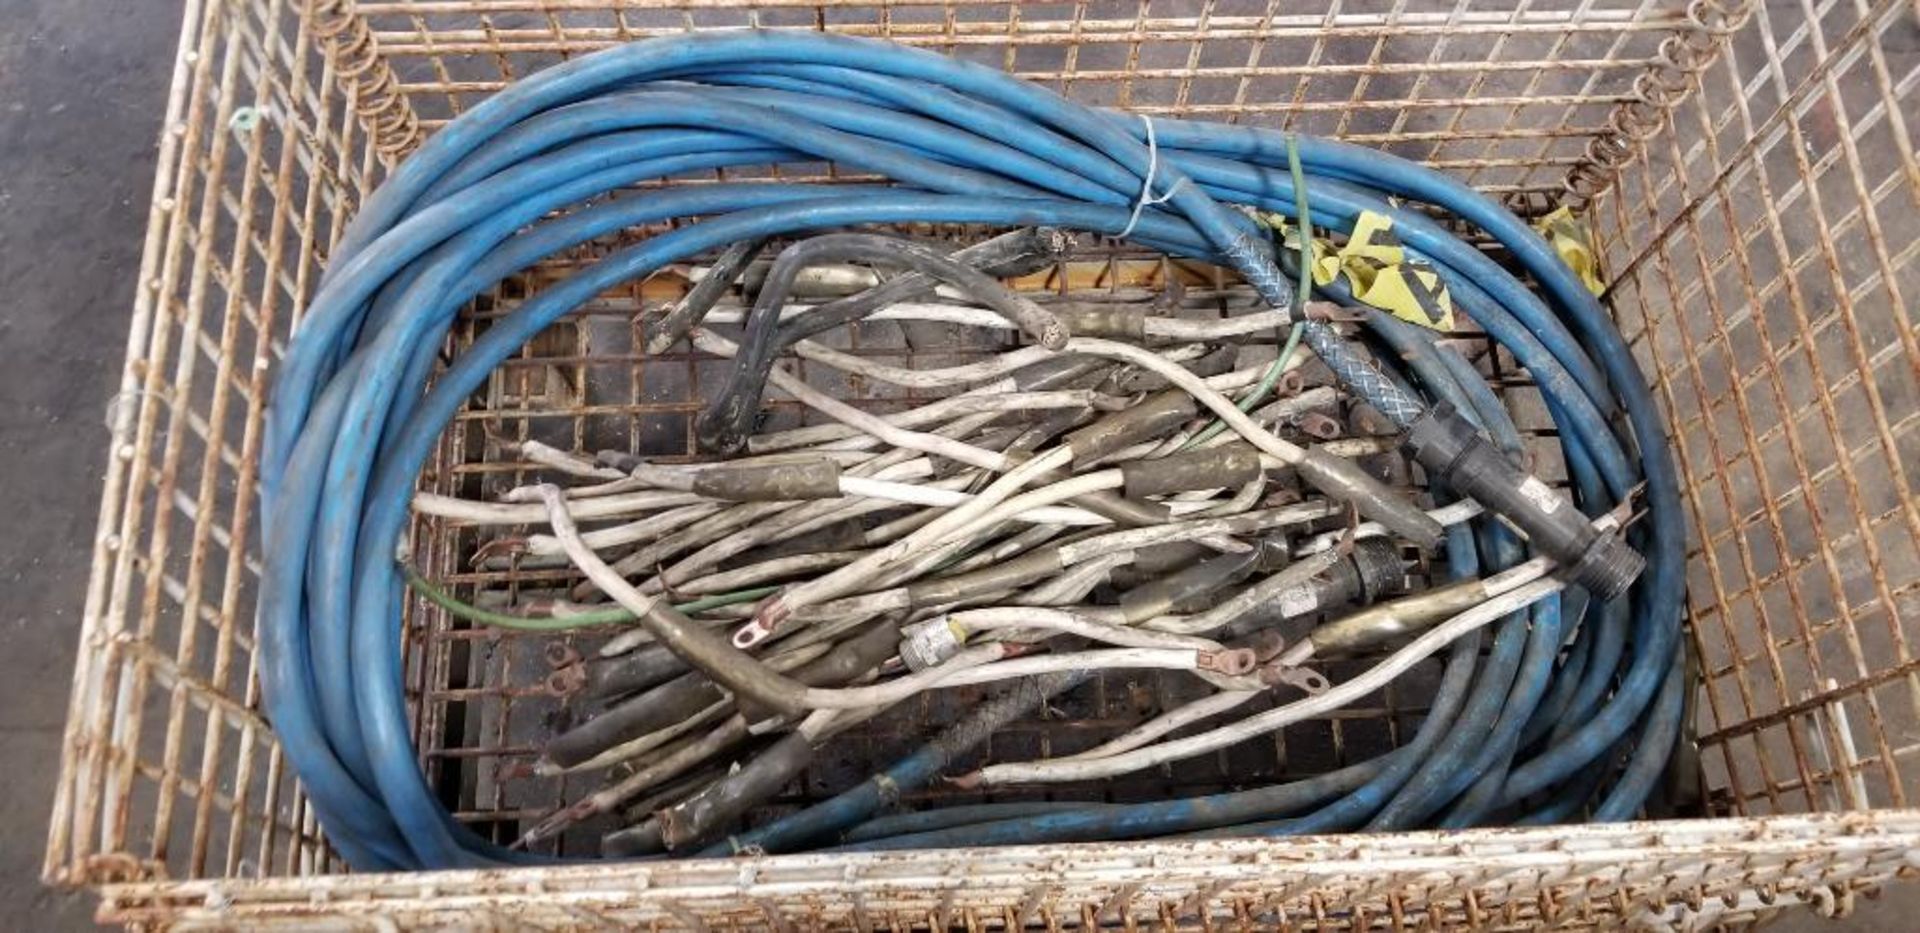 Wire Basket Skid w/ Content of Assorted Wiring - Image 3 of 3